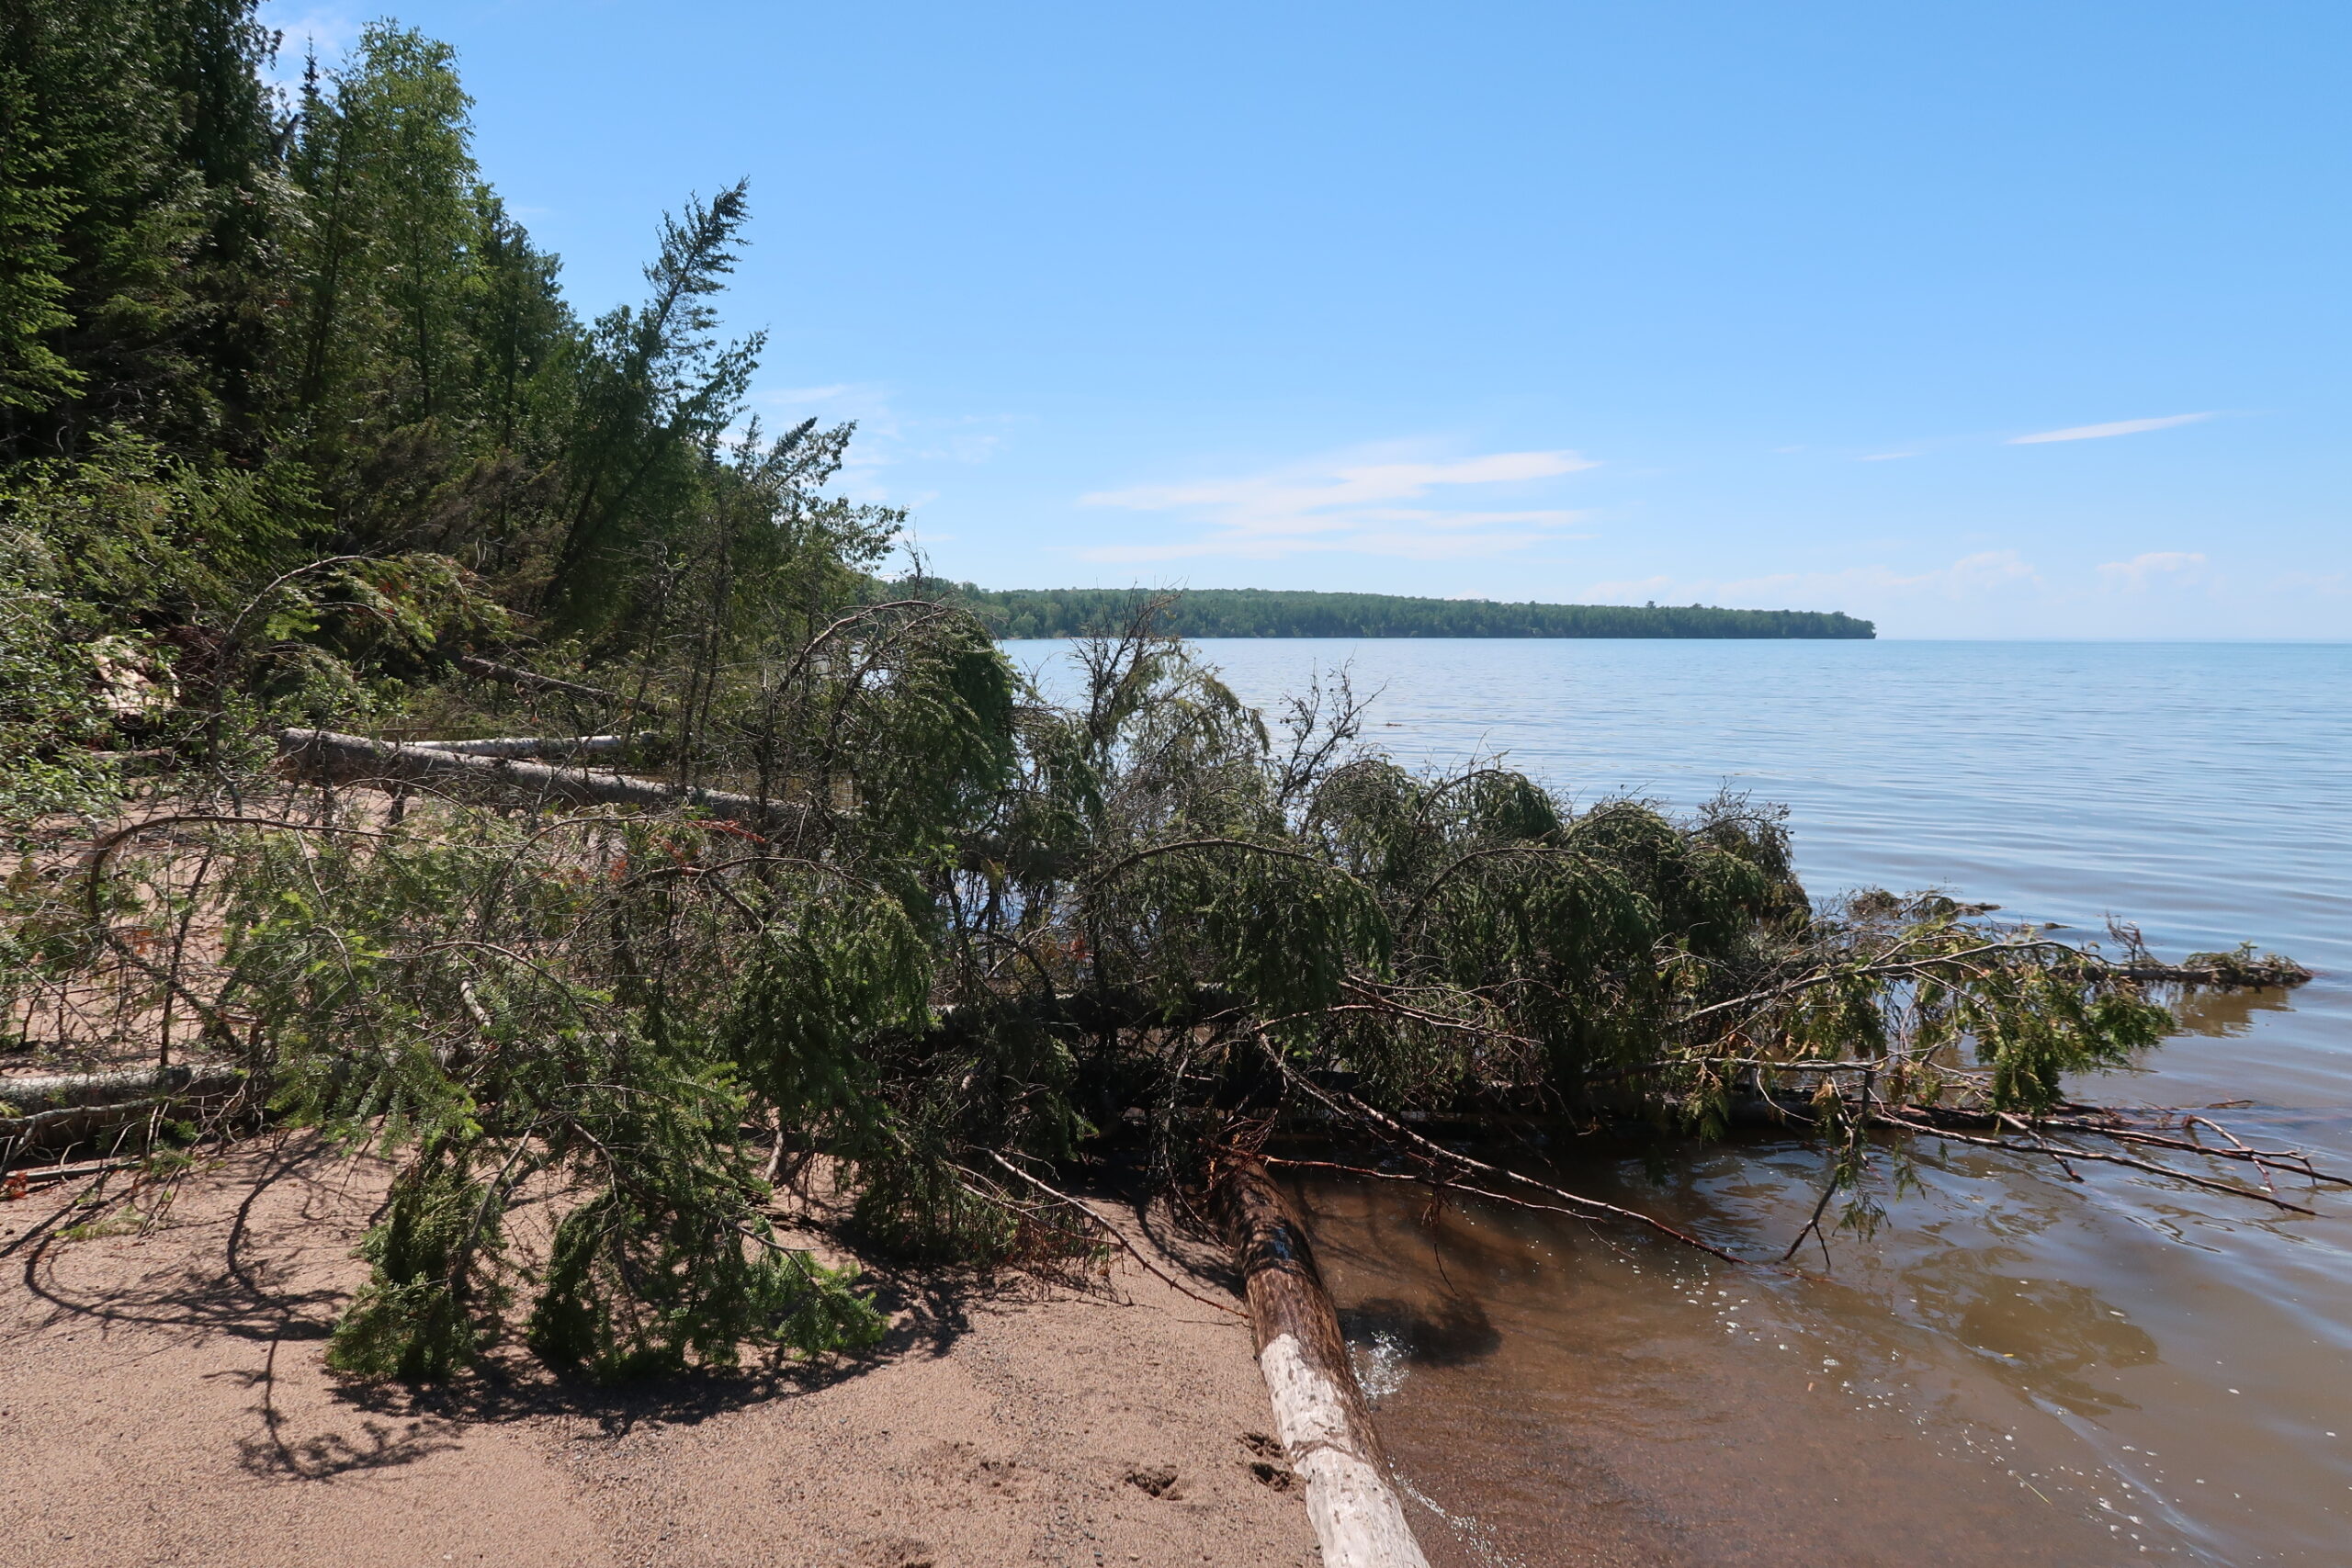 Trees have been cut or lean toward the shoreline.